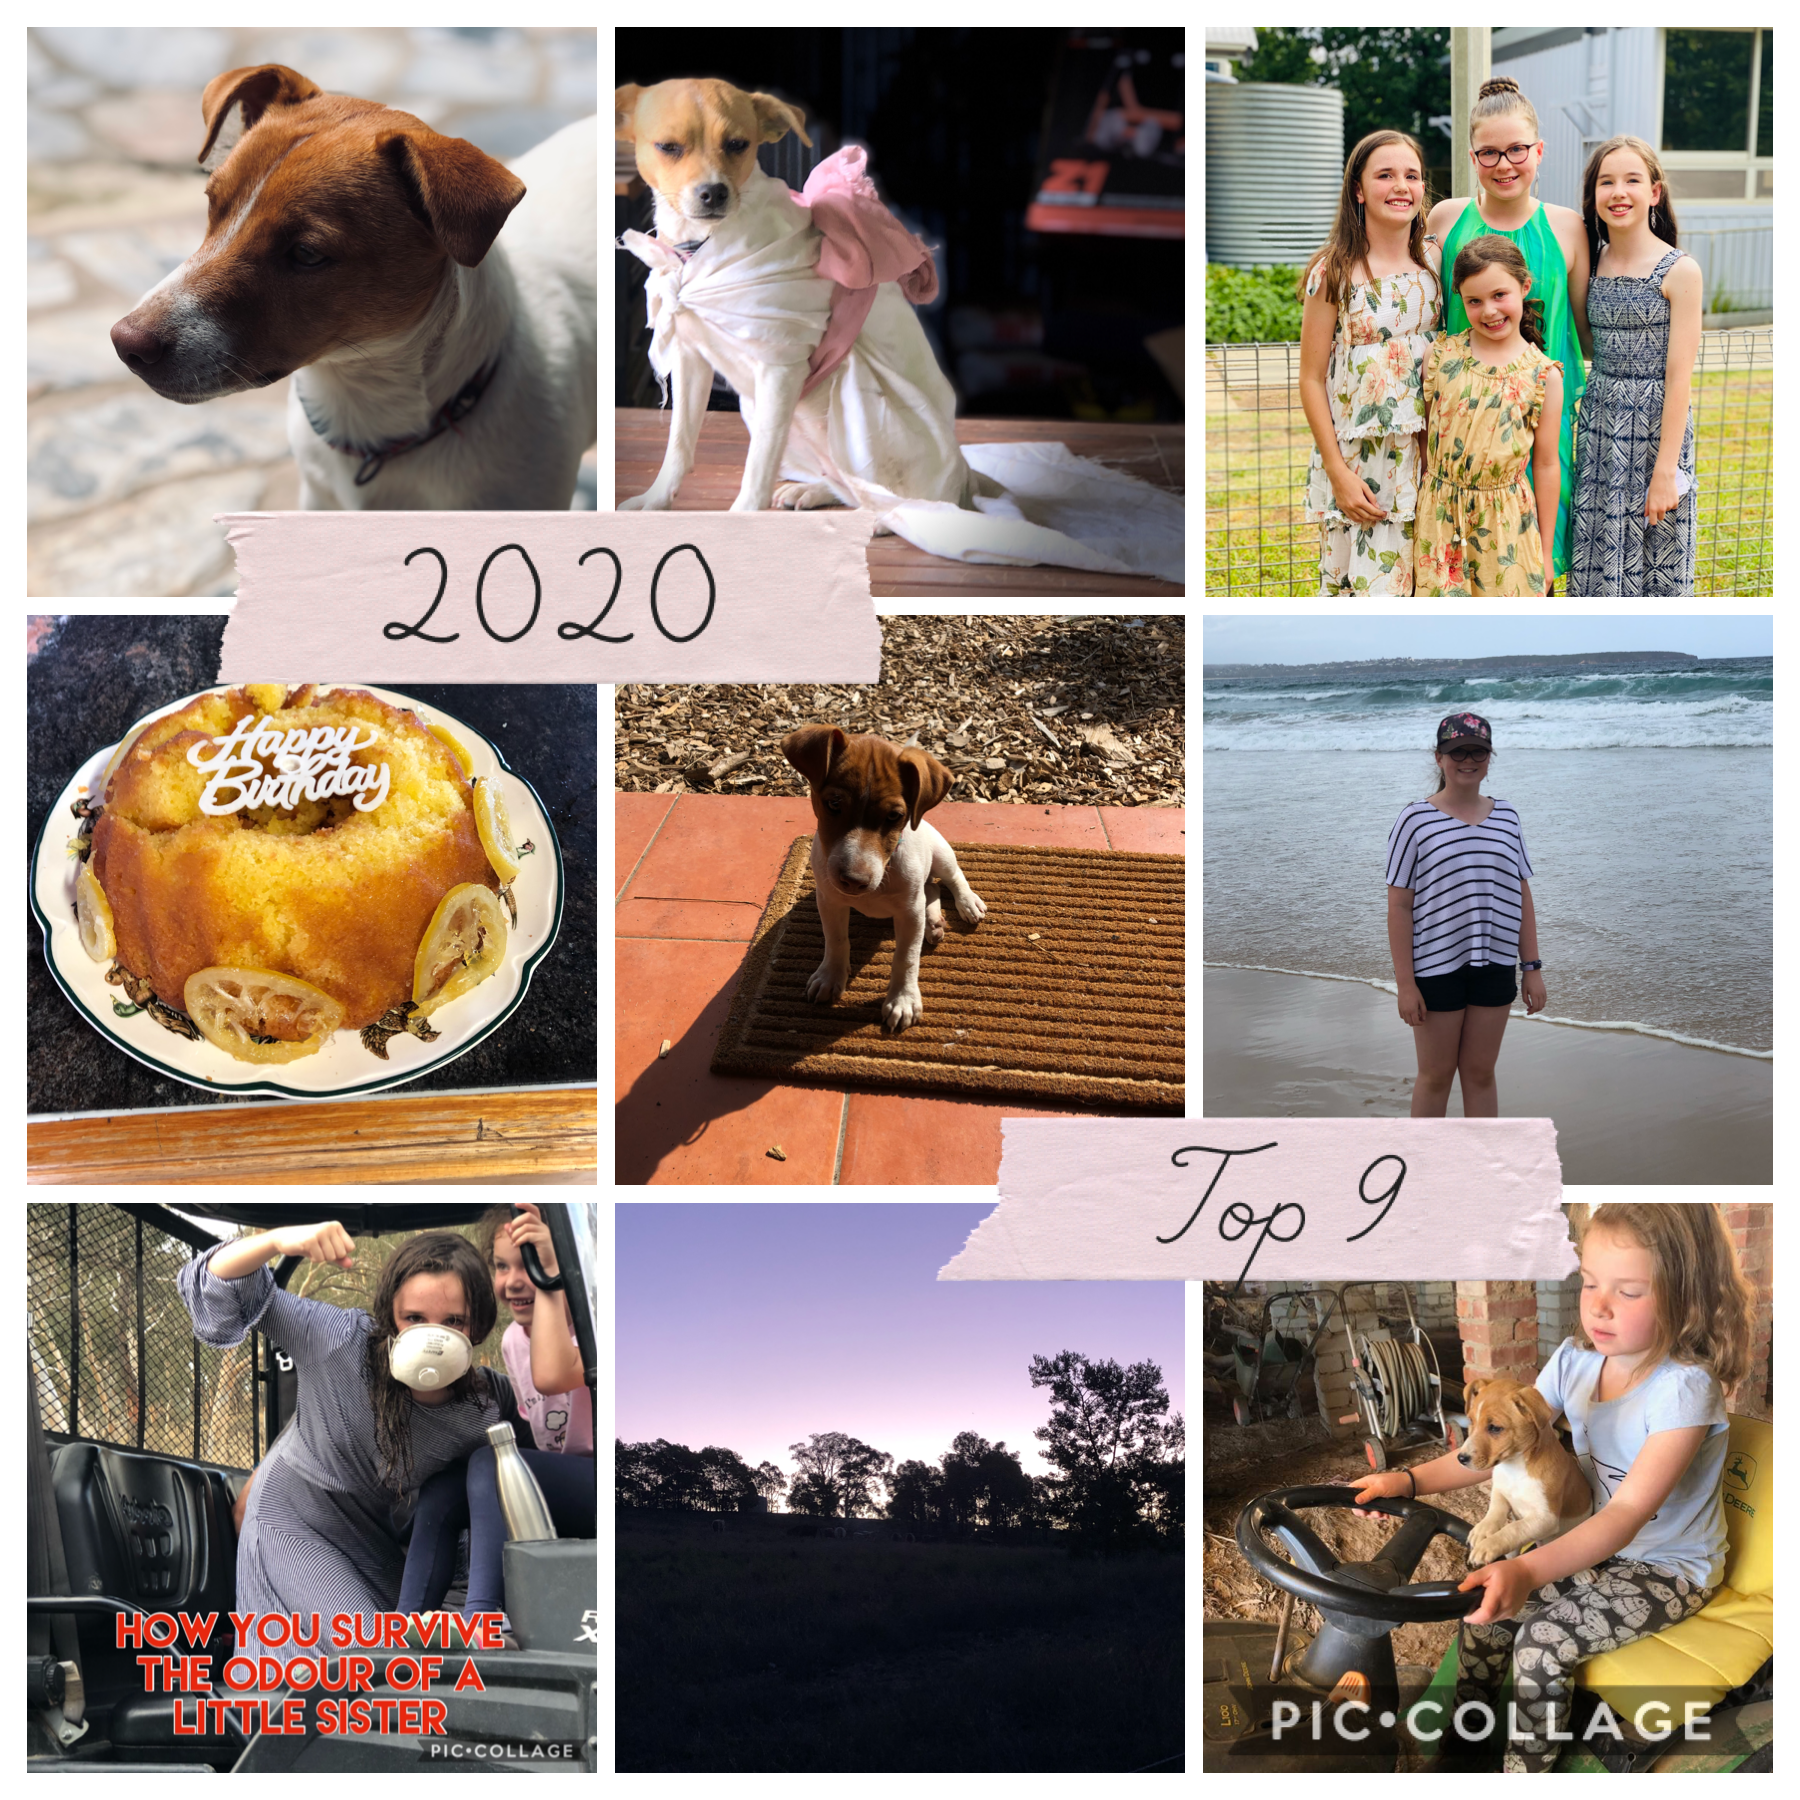 These are my top 9 pictures from 2020. Corona has been tough but we managed to stay strong. I am grateful that I was with my family all year. How do you feel about the year that has been and is almost gone?
#familytime
